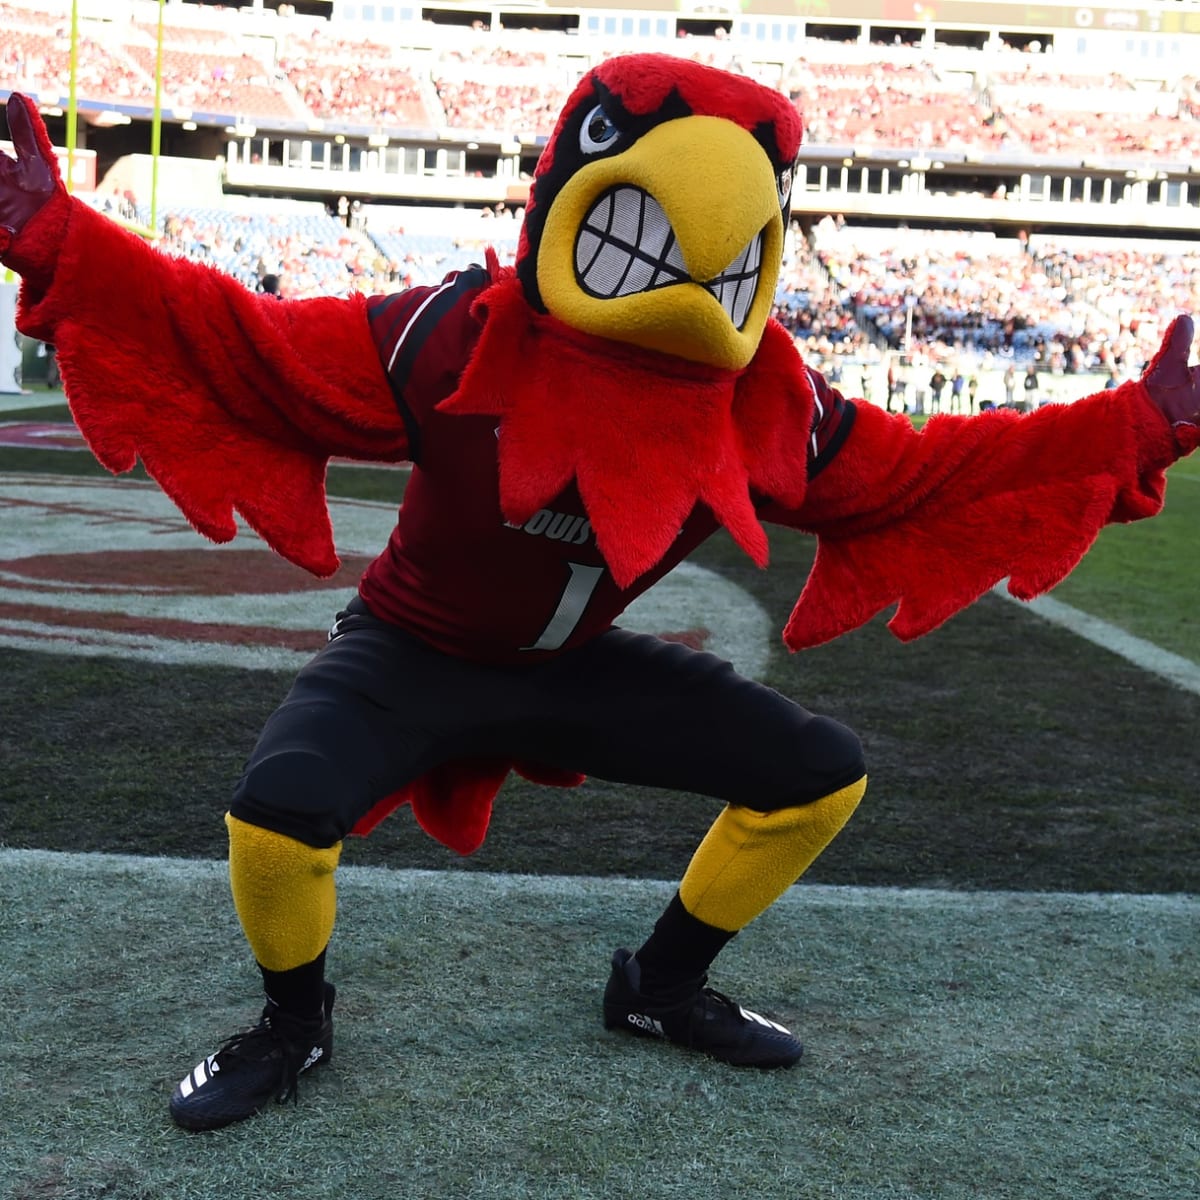 louisville cardinals game-day outfit ideas * Lou What Wear